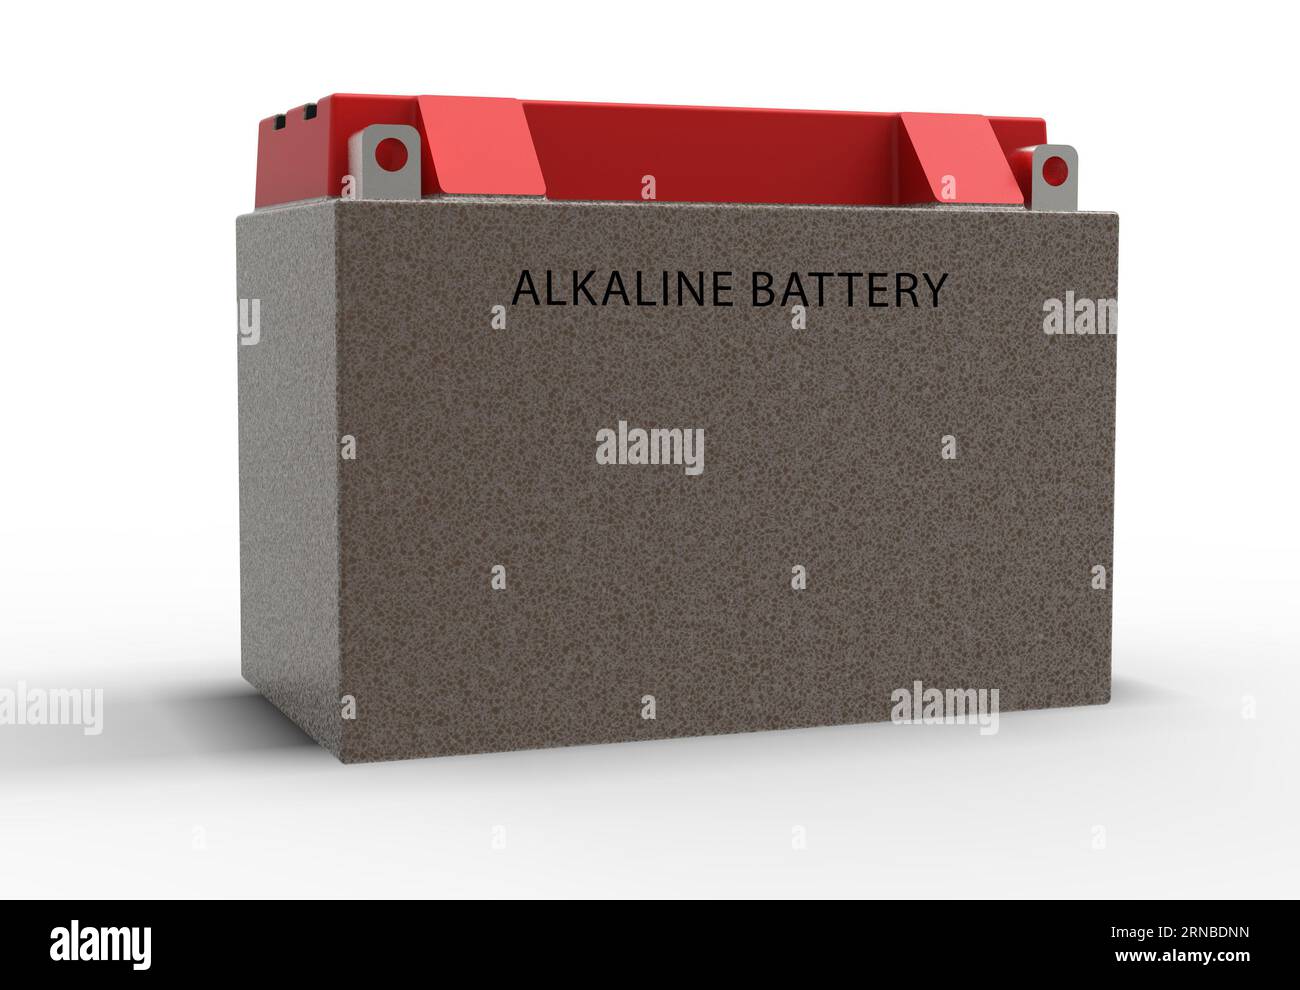 Alkaline Battery An alkaline battery is a primary battery that uses manganese dioxide and zinc to generate electricity. It is a common type of battery Stock Photo